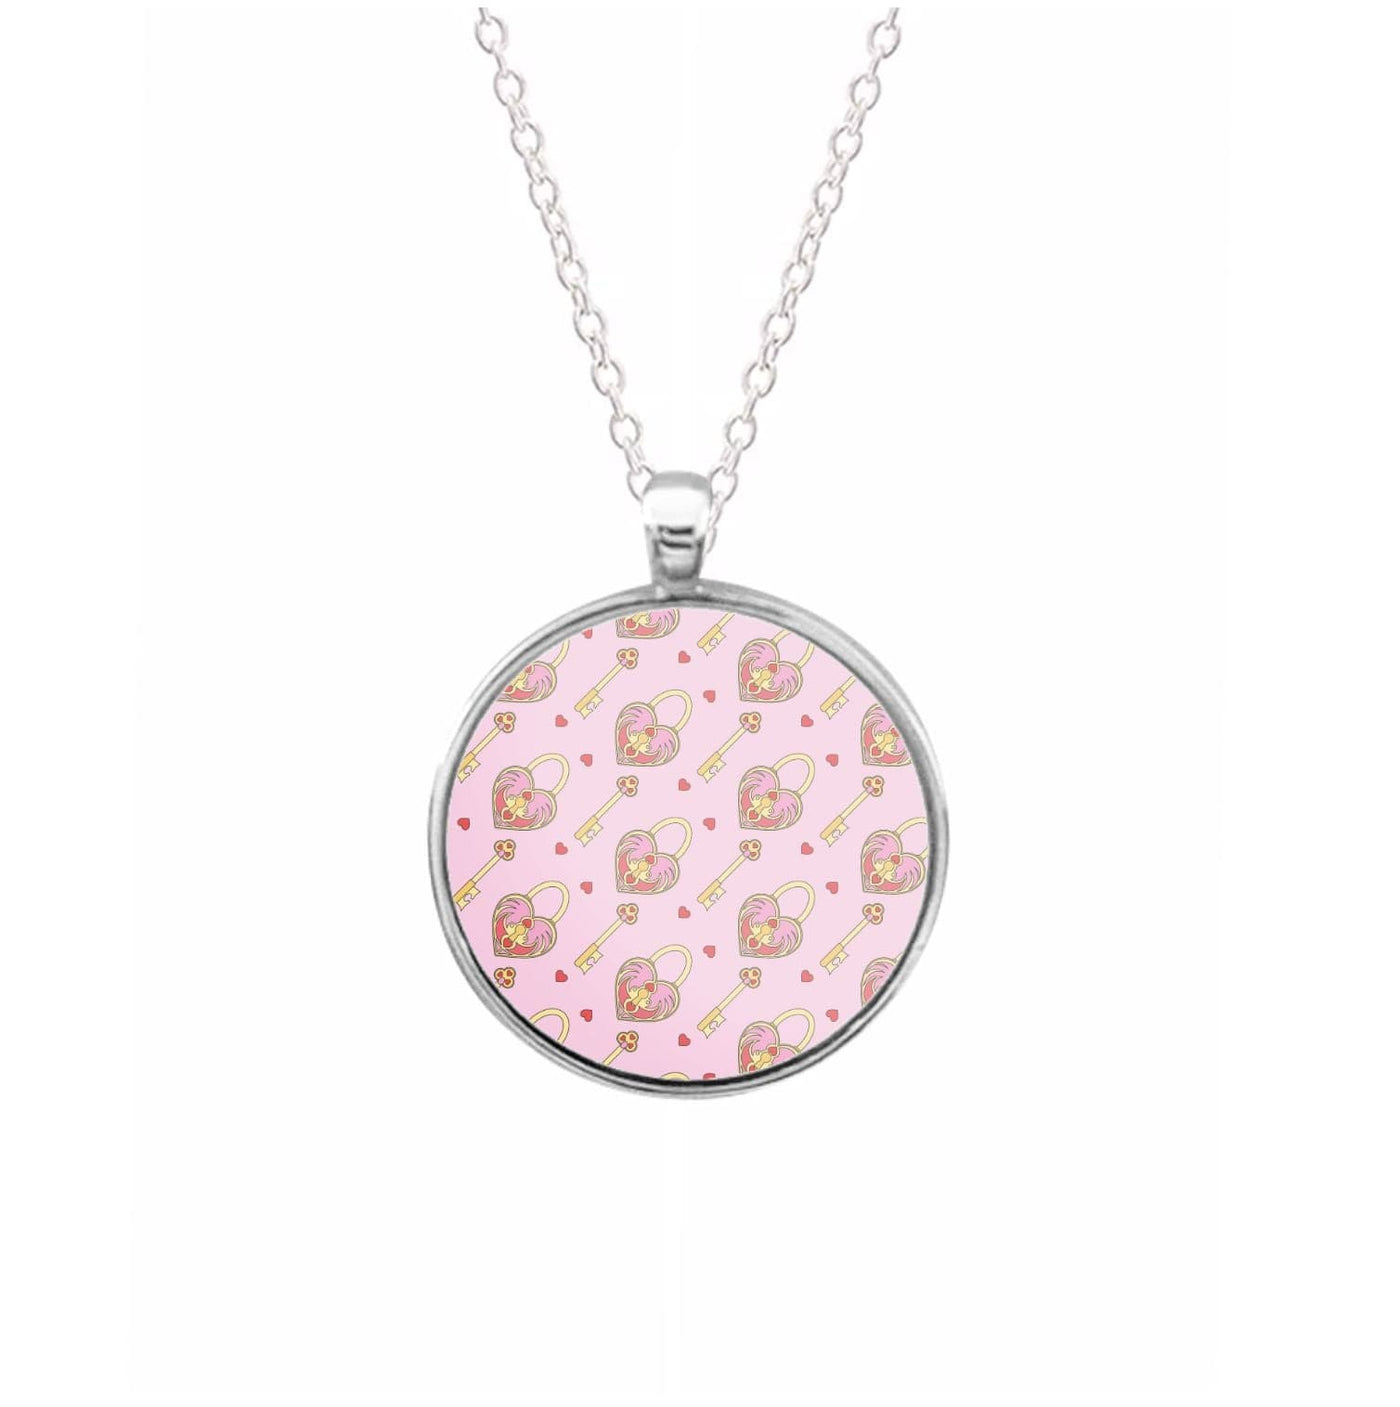 Pink Locket And Key - Valentine's Day Necklace